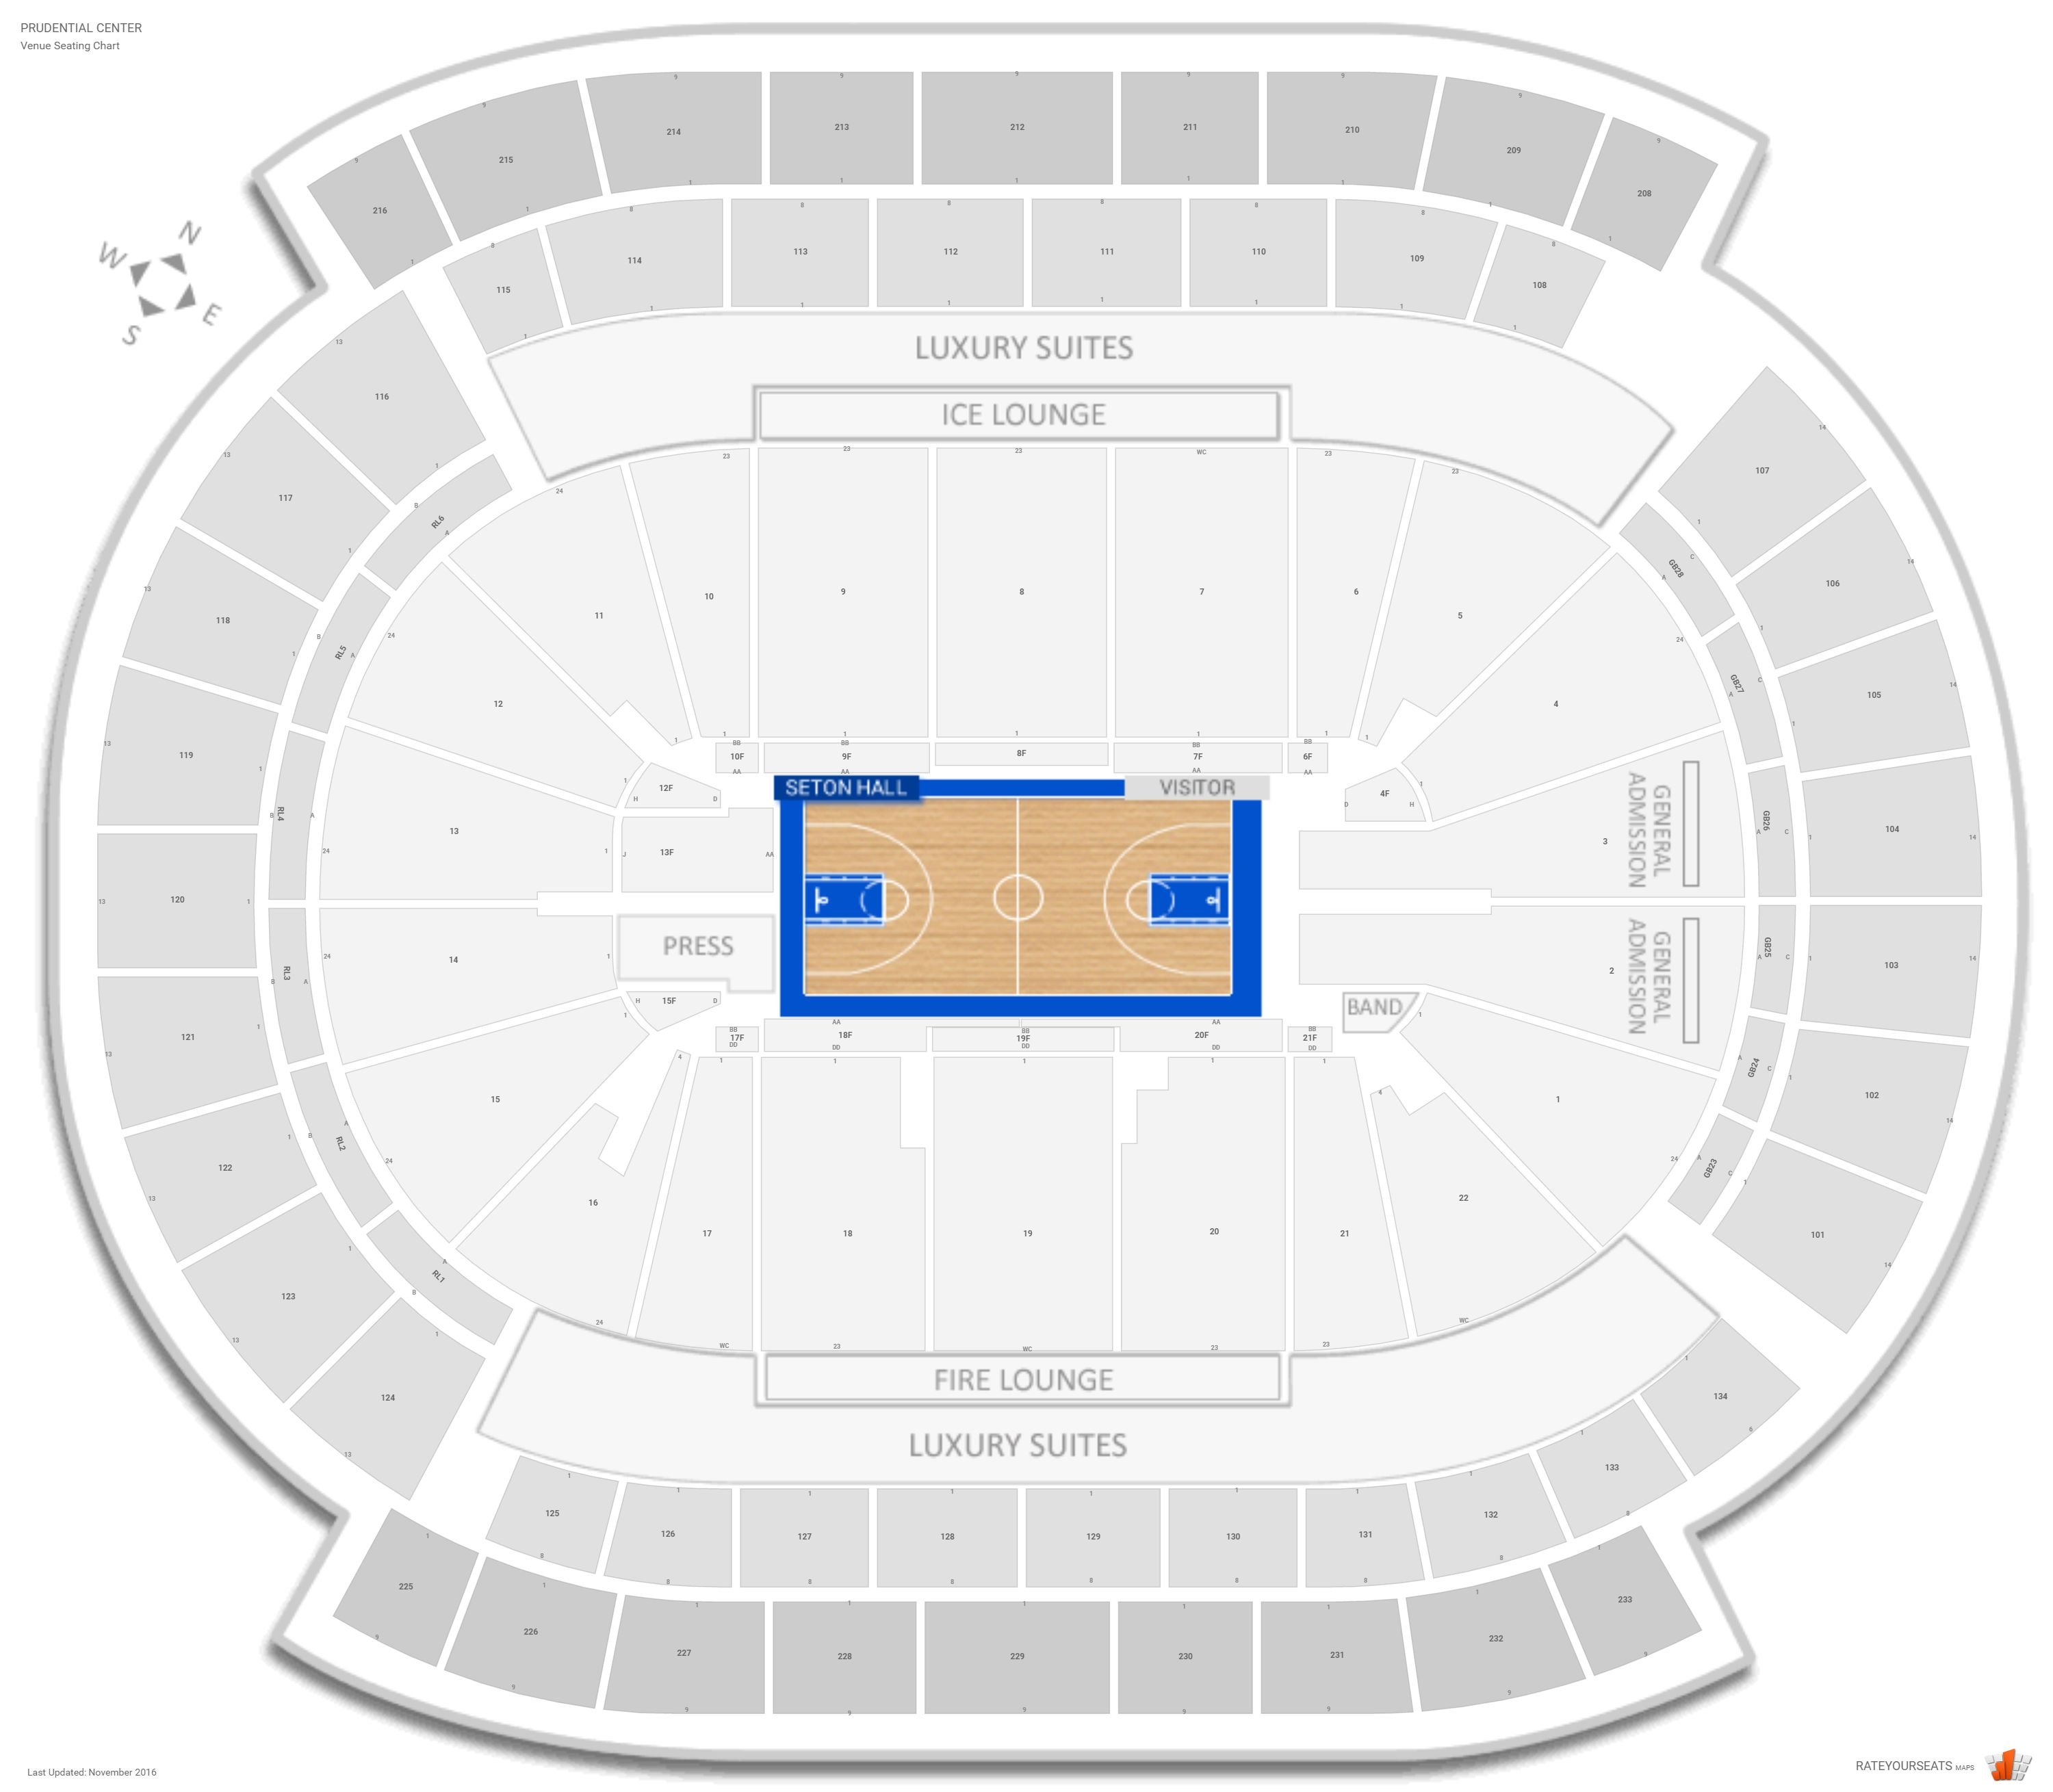 Prudential Center Seating Chart Obama